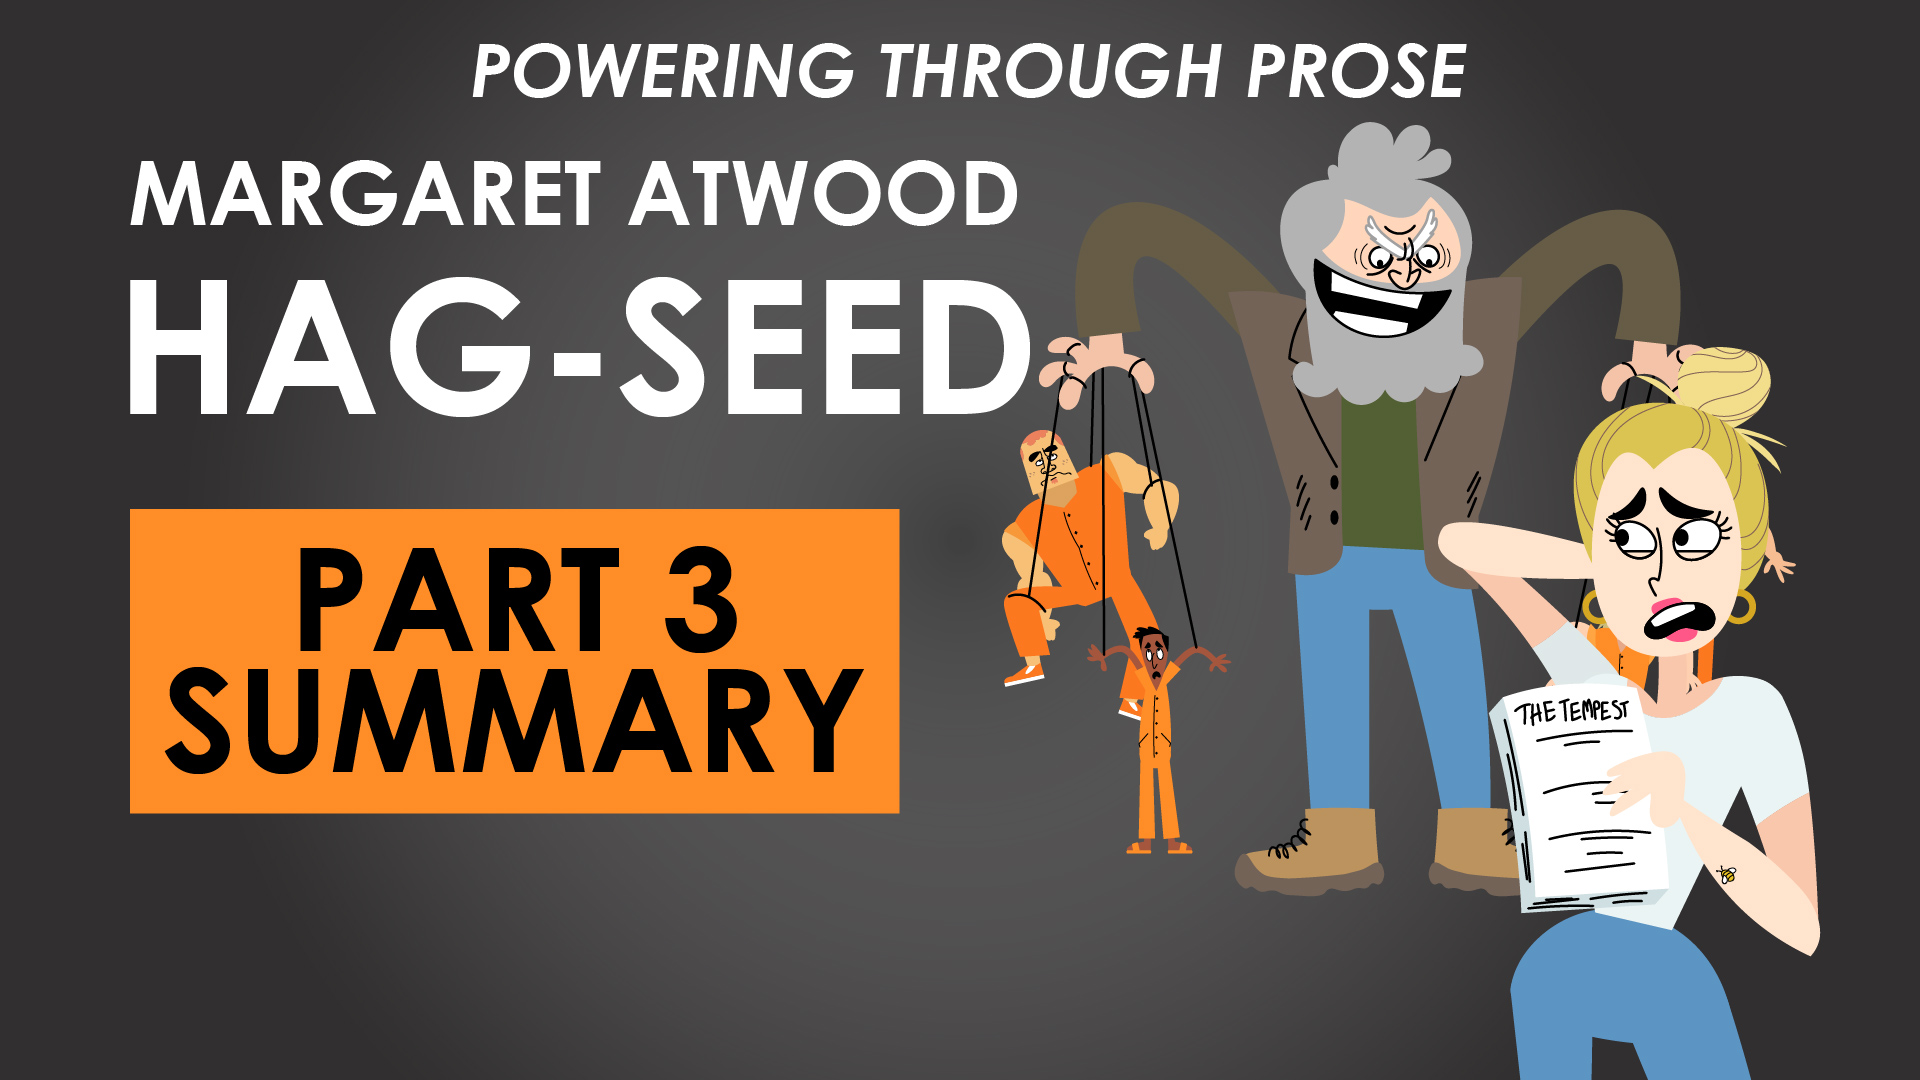 Hag-Seed - Margaret Atwood - Part 3 Summary - Powering through Prose Series